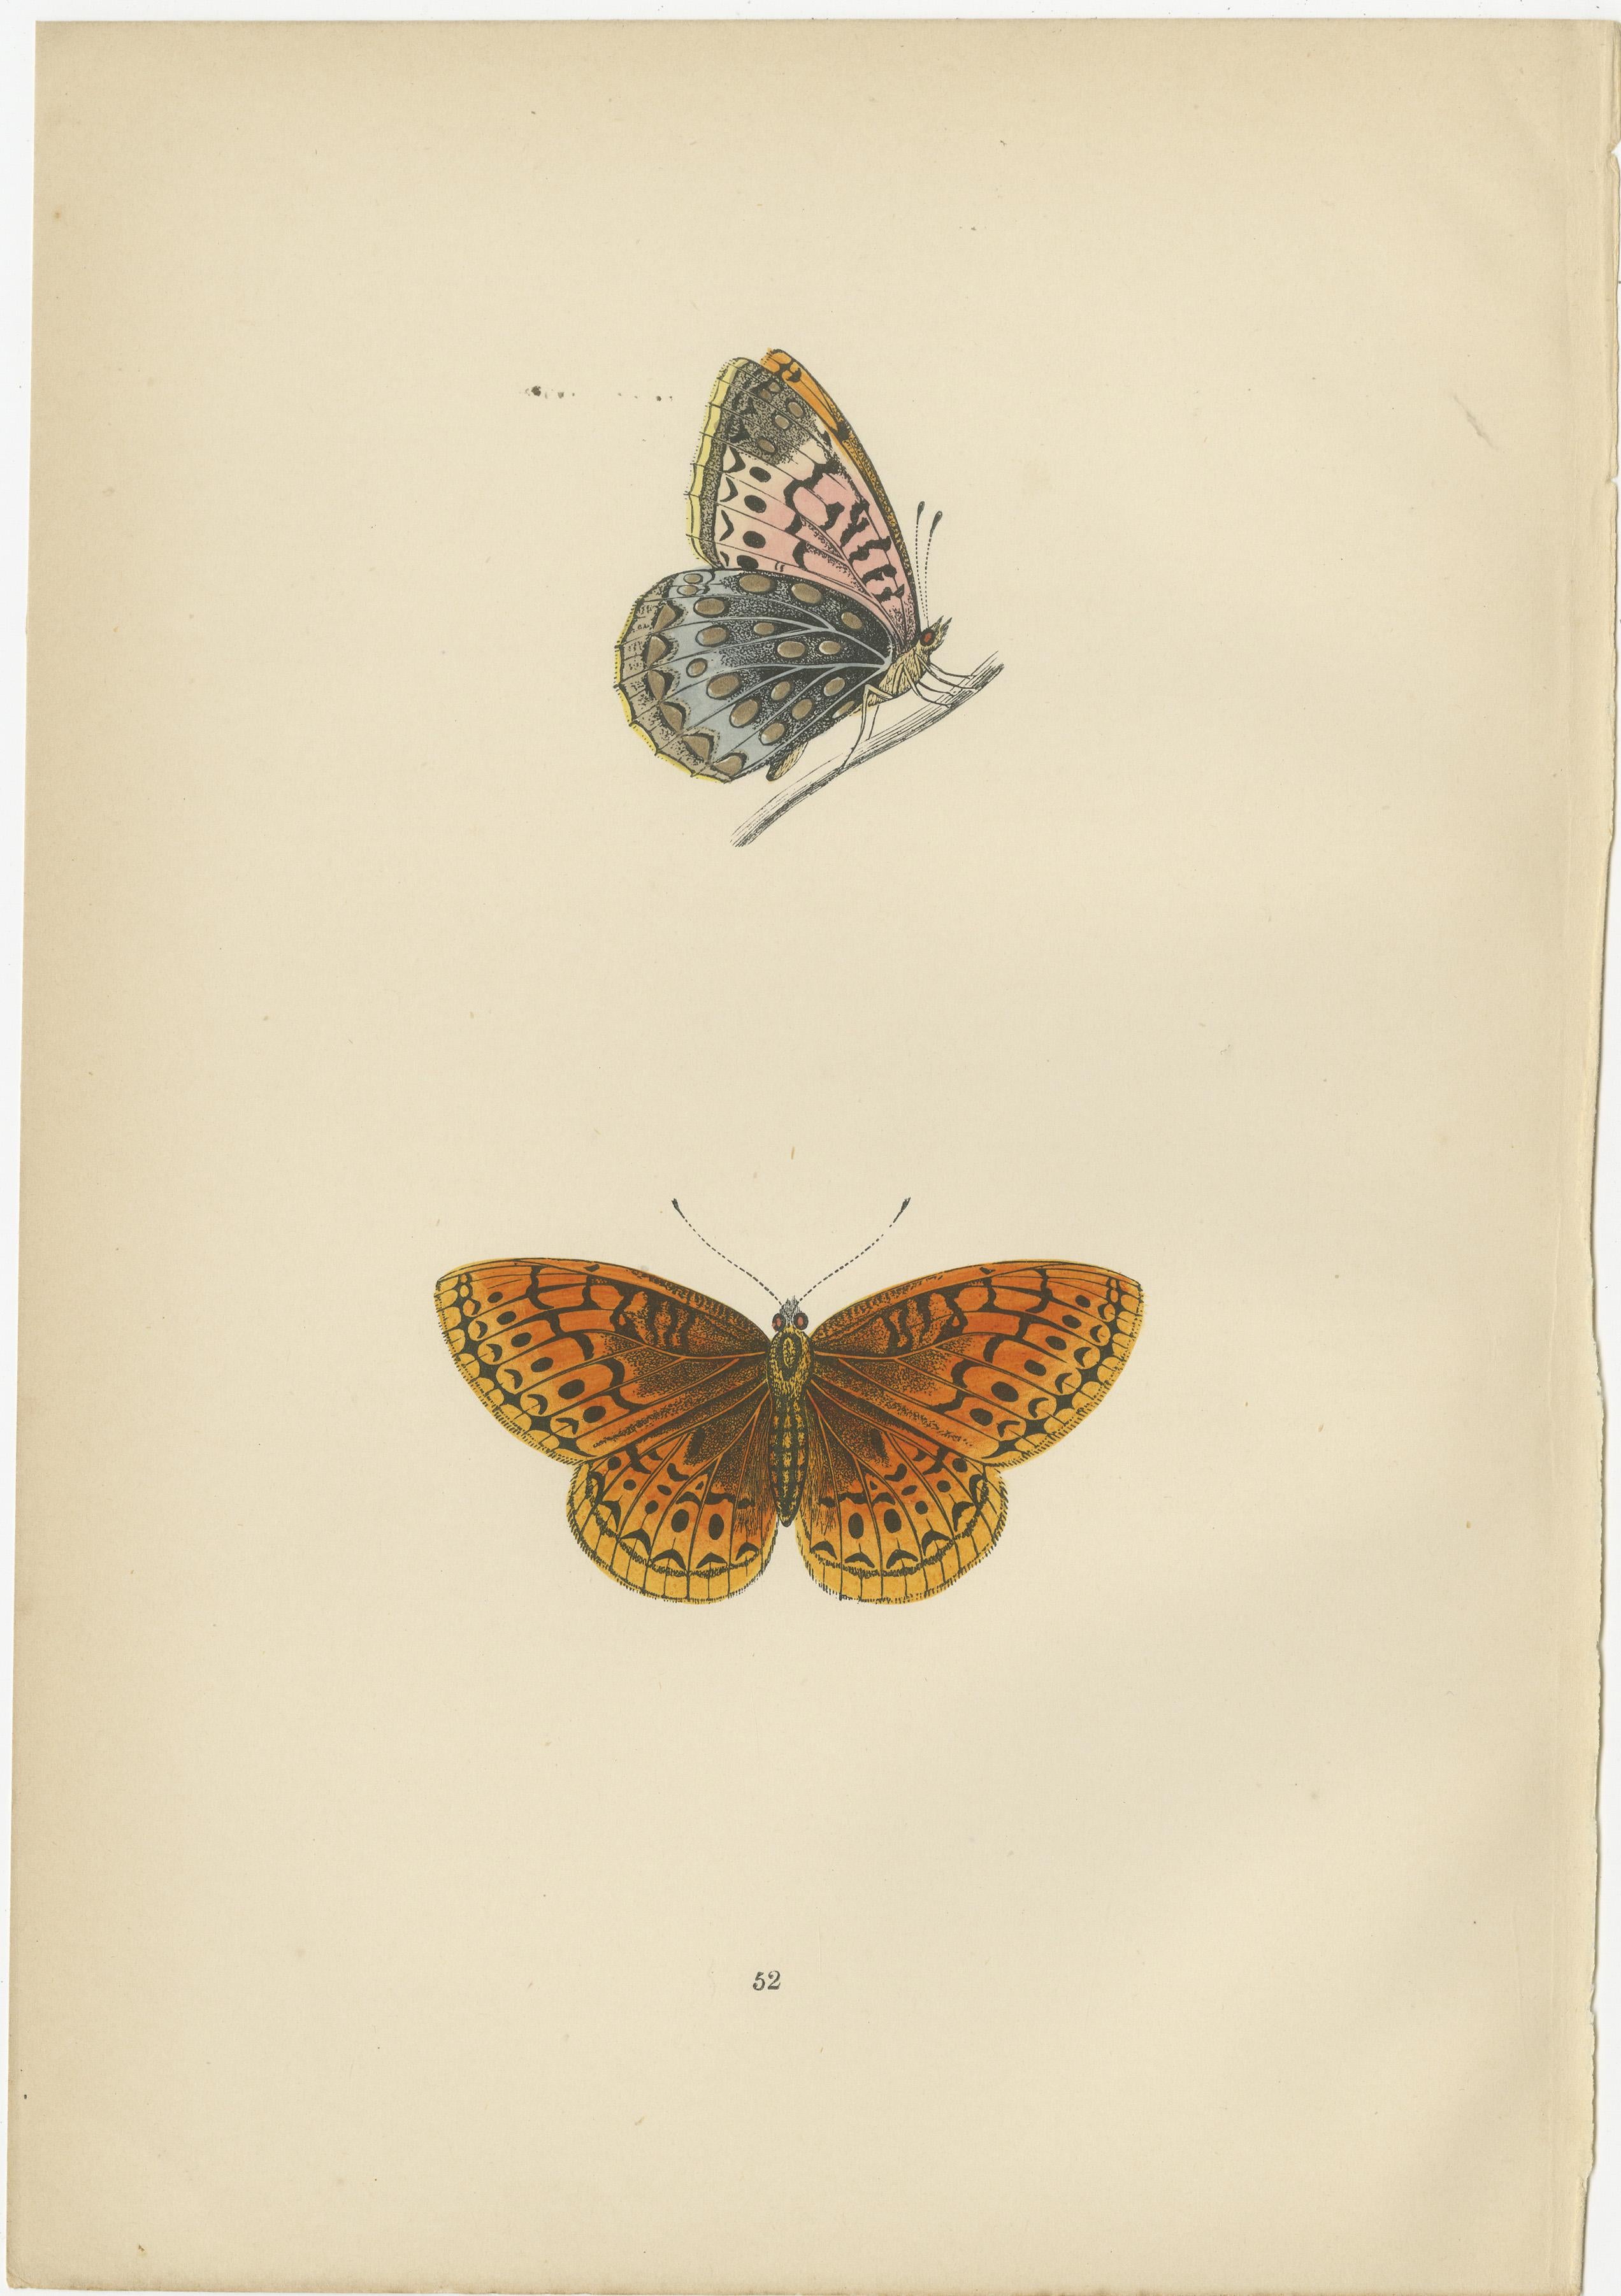 Original Antique prints of butterflies that are hand-colored in the late 19th century. More details about the butterflies:

1. **Venus Fritillary (Argynnis pandora)**: This is not a British species but is found in Southern Europe and across the